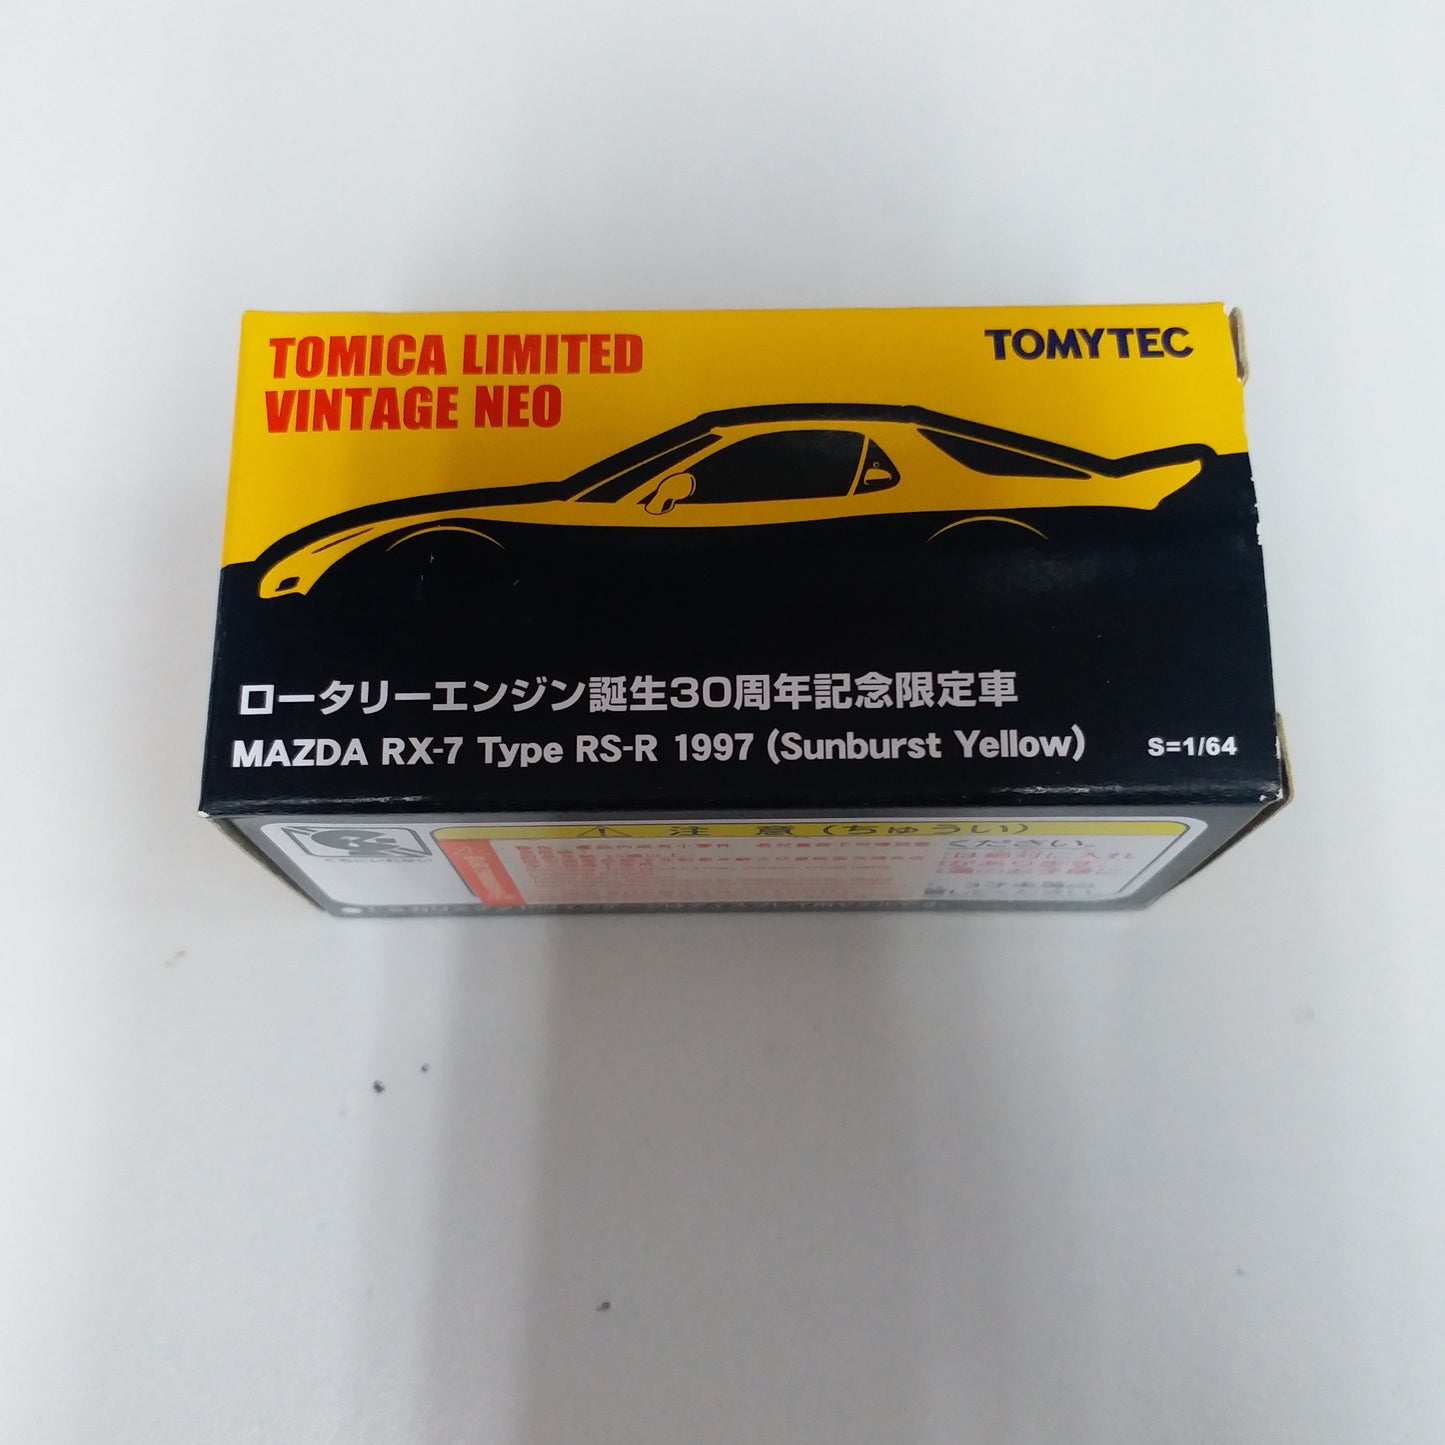 Tomica Limited Vintage Neo Mazda RX-7 FD3S Sunburst Yellow Hong Kong Exclusive Scale 1:64